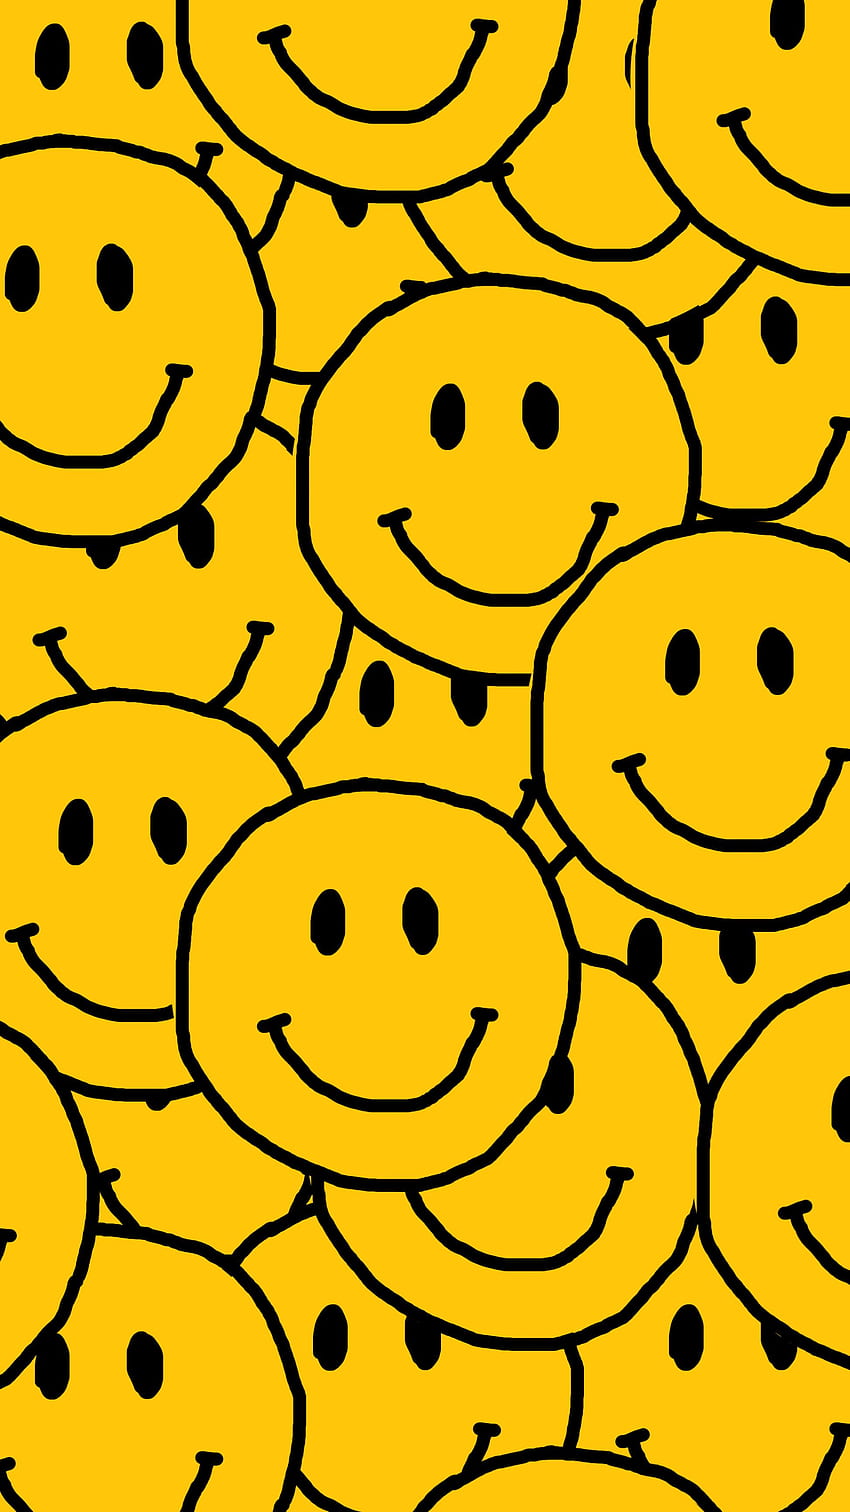 Yellow Smiley Face Wallpaper  Funny Smiley Face Wallpaper for iPhone